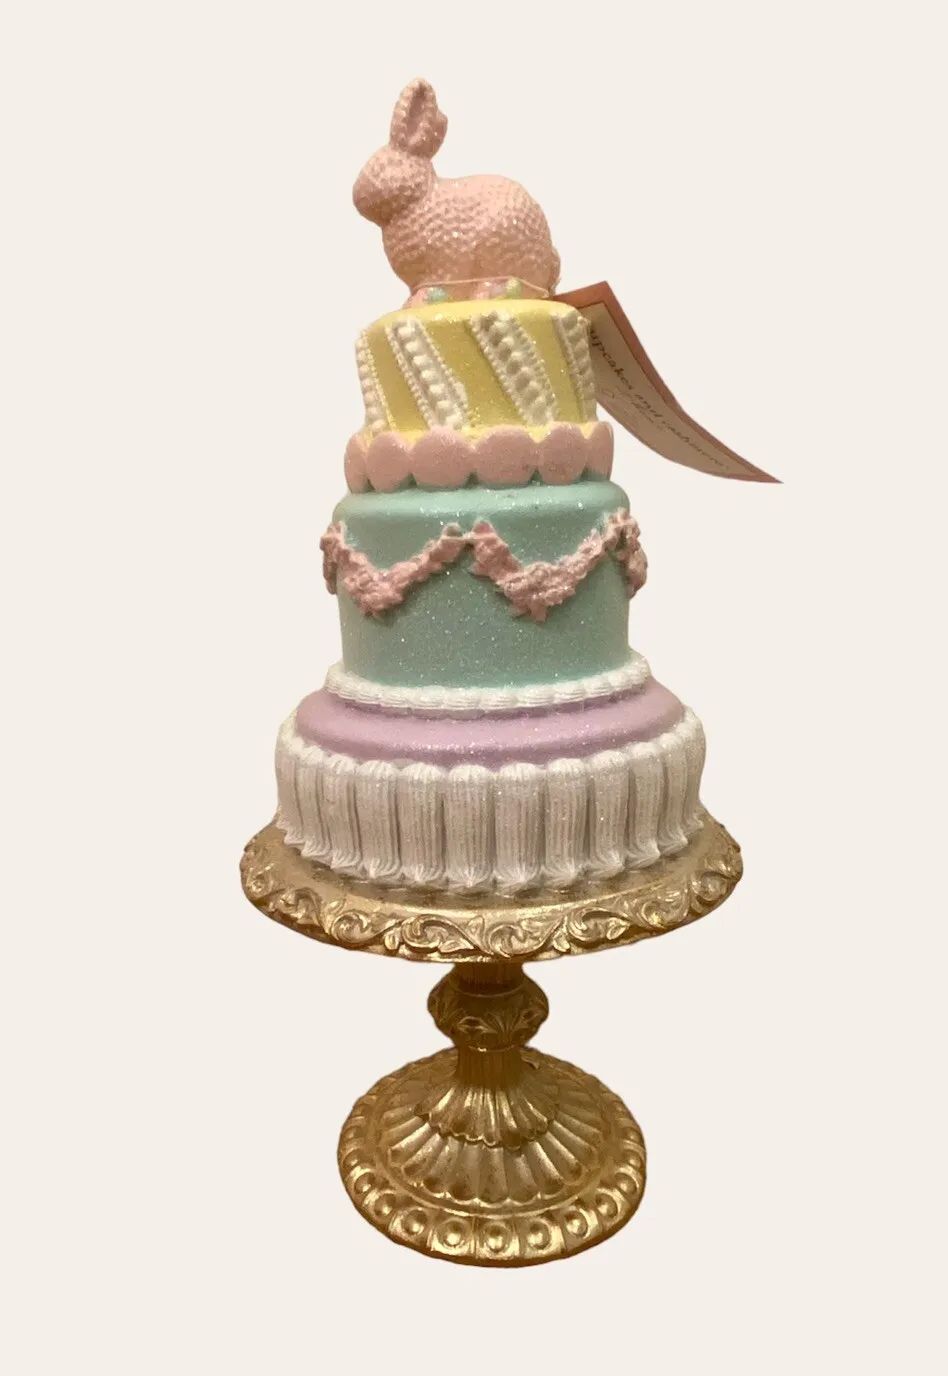 Cupcakes and Cashmere Pastel Easter Bunny Cake on Cake Stand 14”  | eBay | eBay US